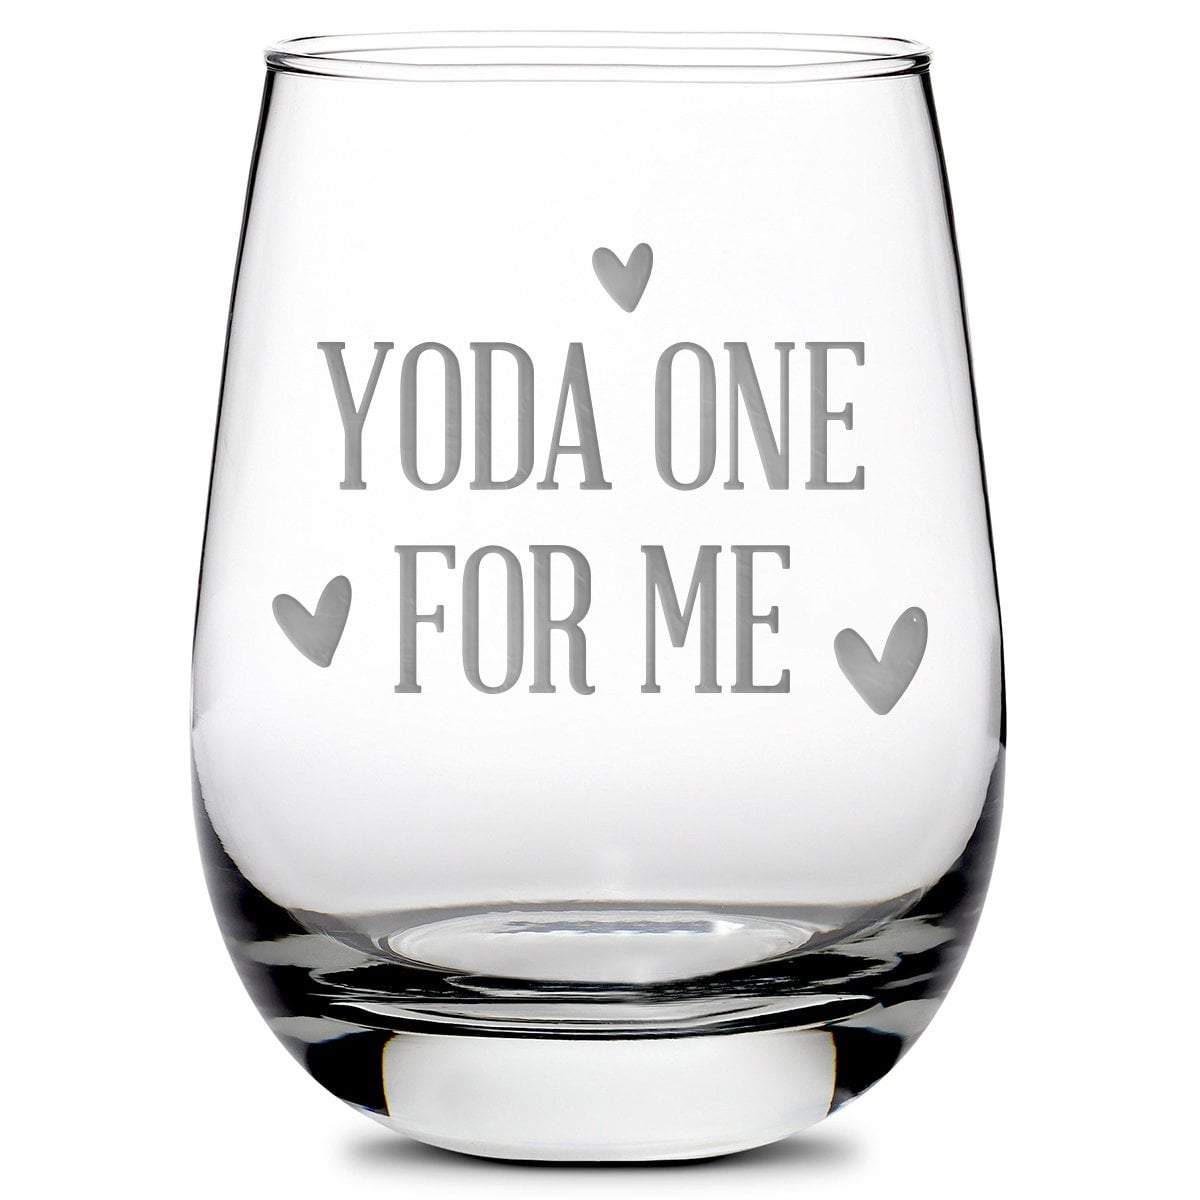 Premium Stemless Wine Glass, Baby Yoda One For Me, 16oz, Laser Etched or Hand Etched